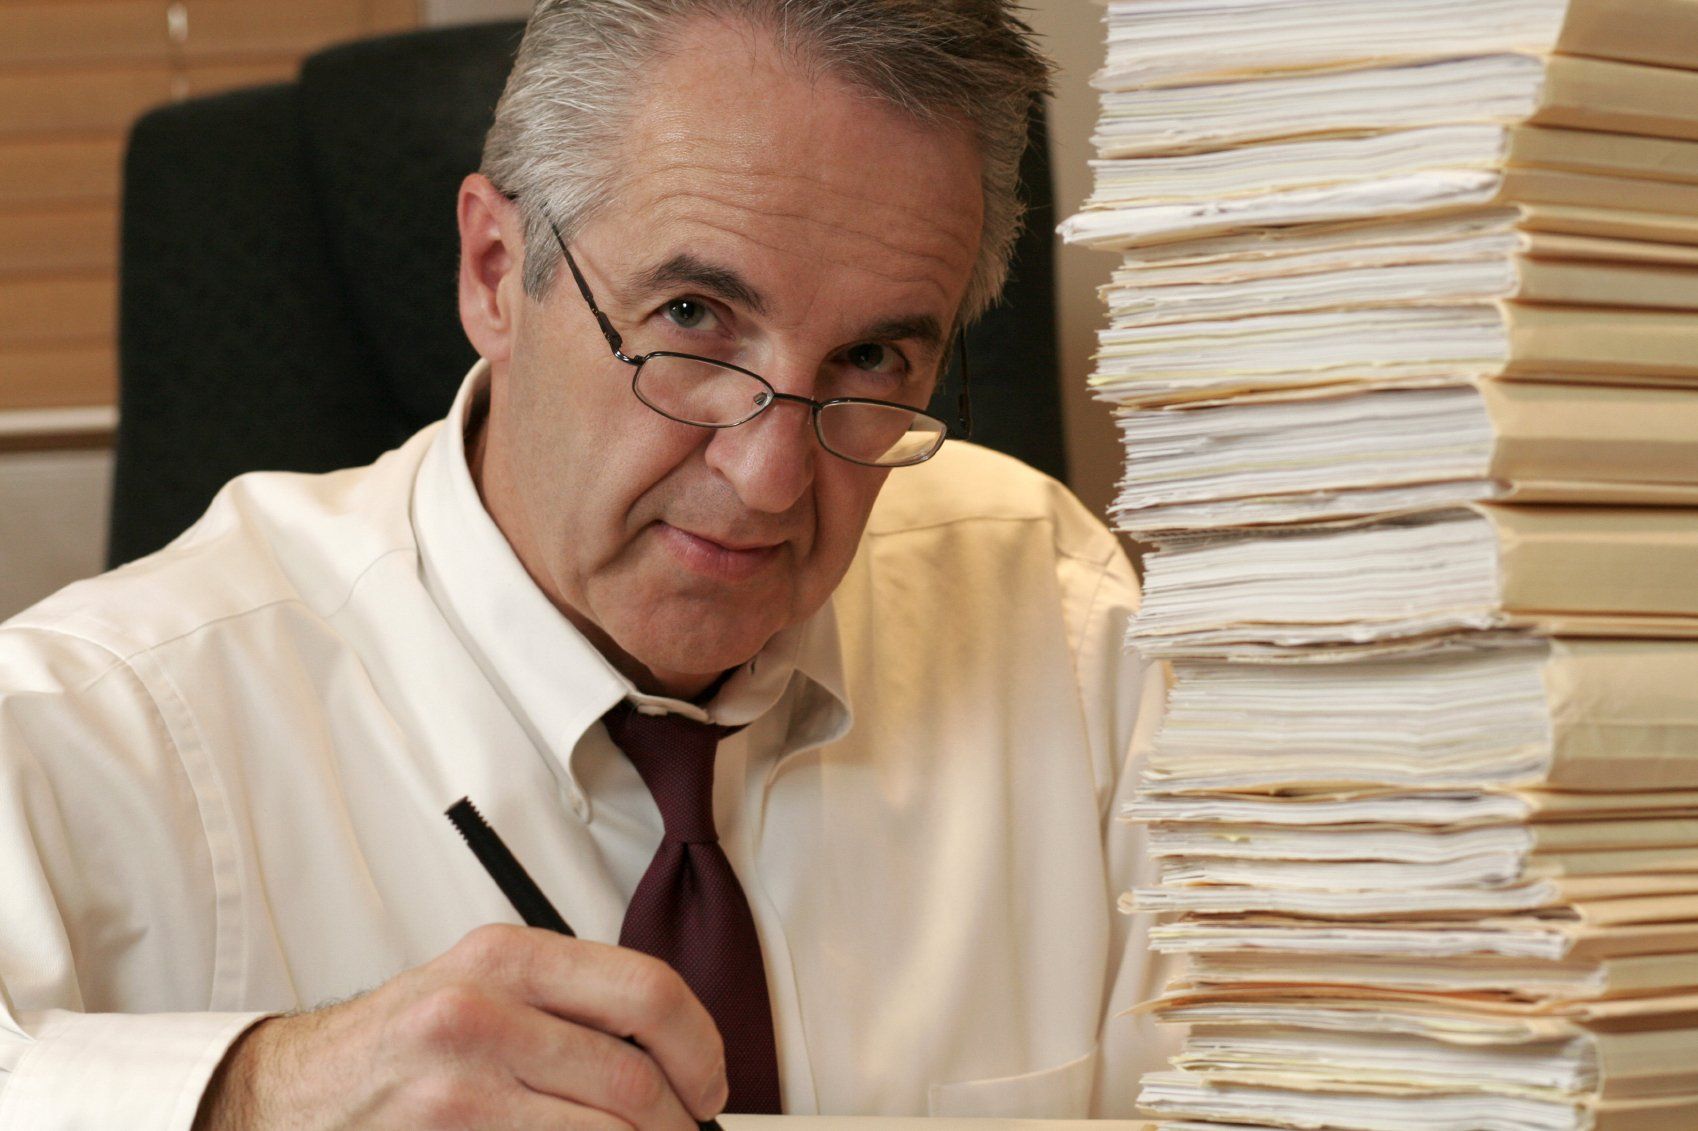 A stressed accountant at his desk, with a mountain of papers in front of him.